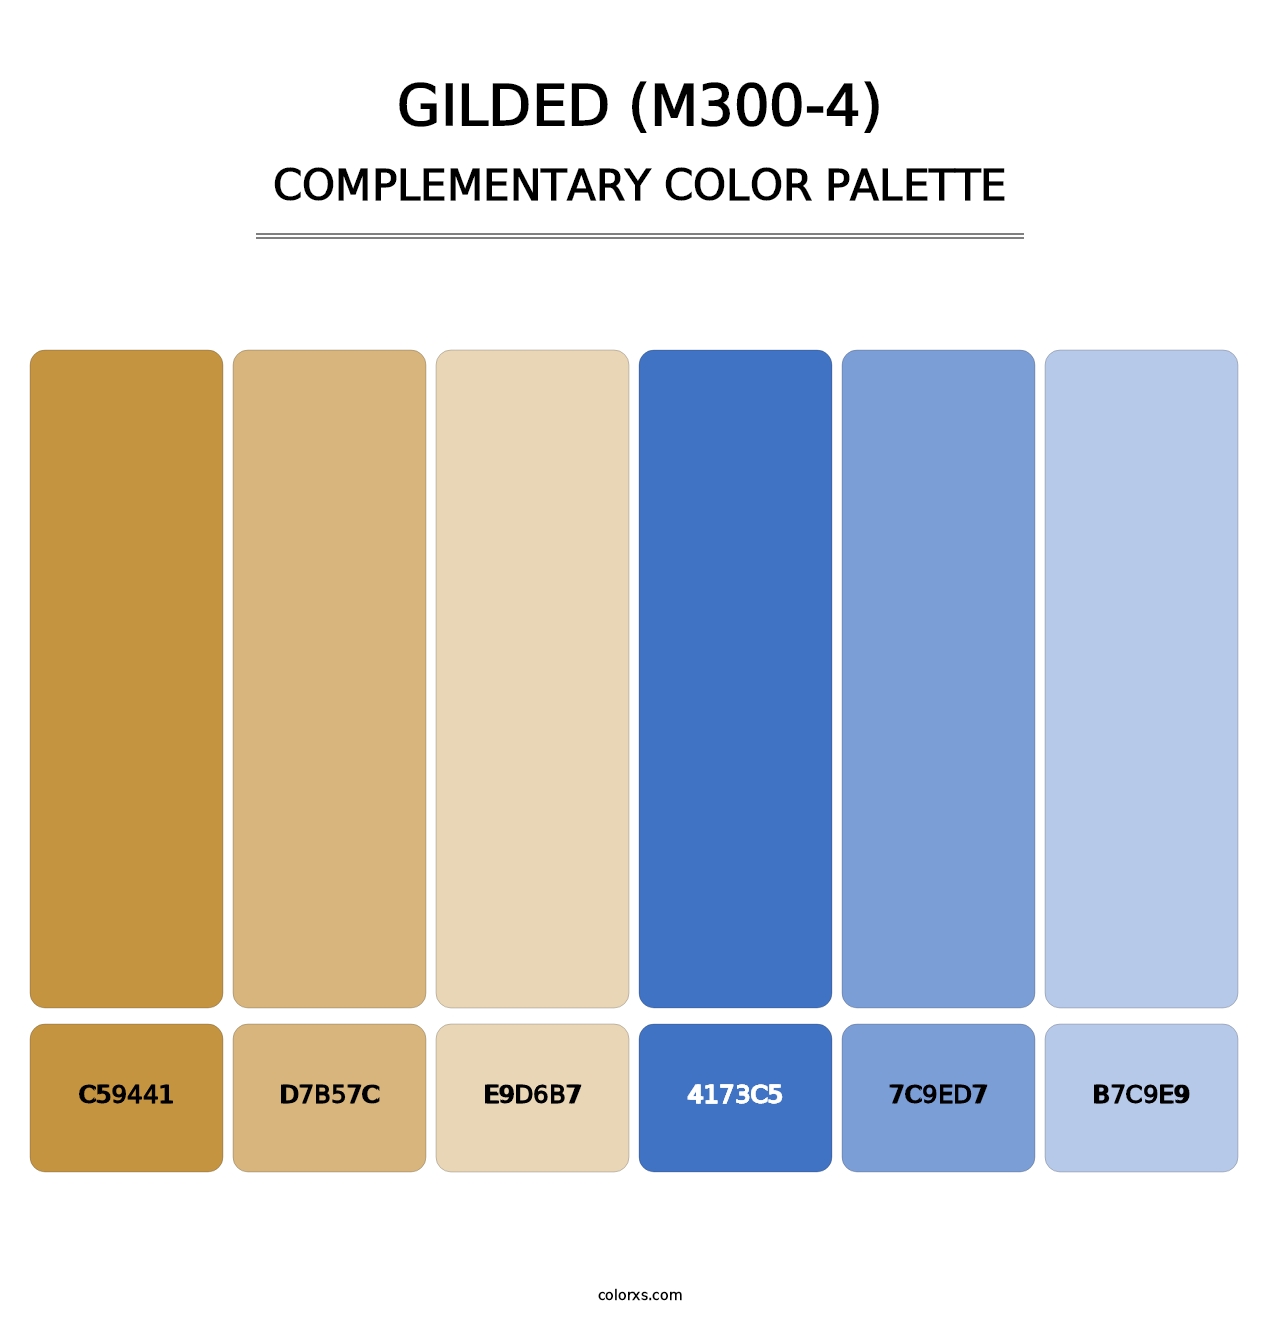 Gilded (M300-4) - Complementary Color Palette